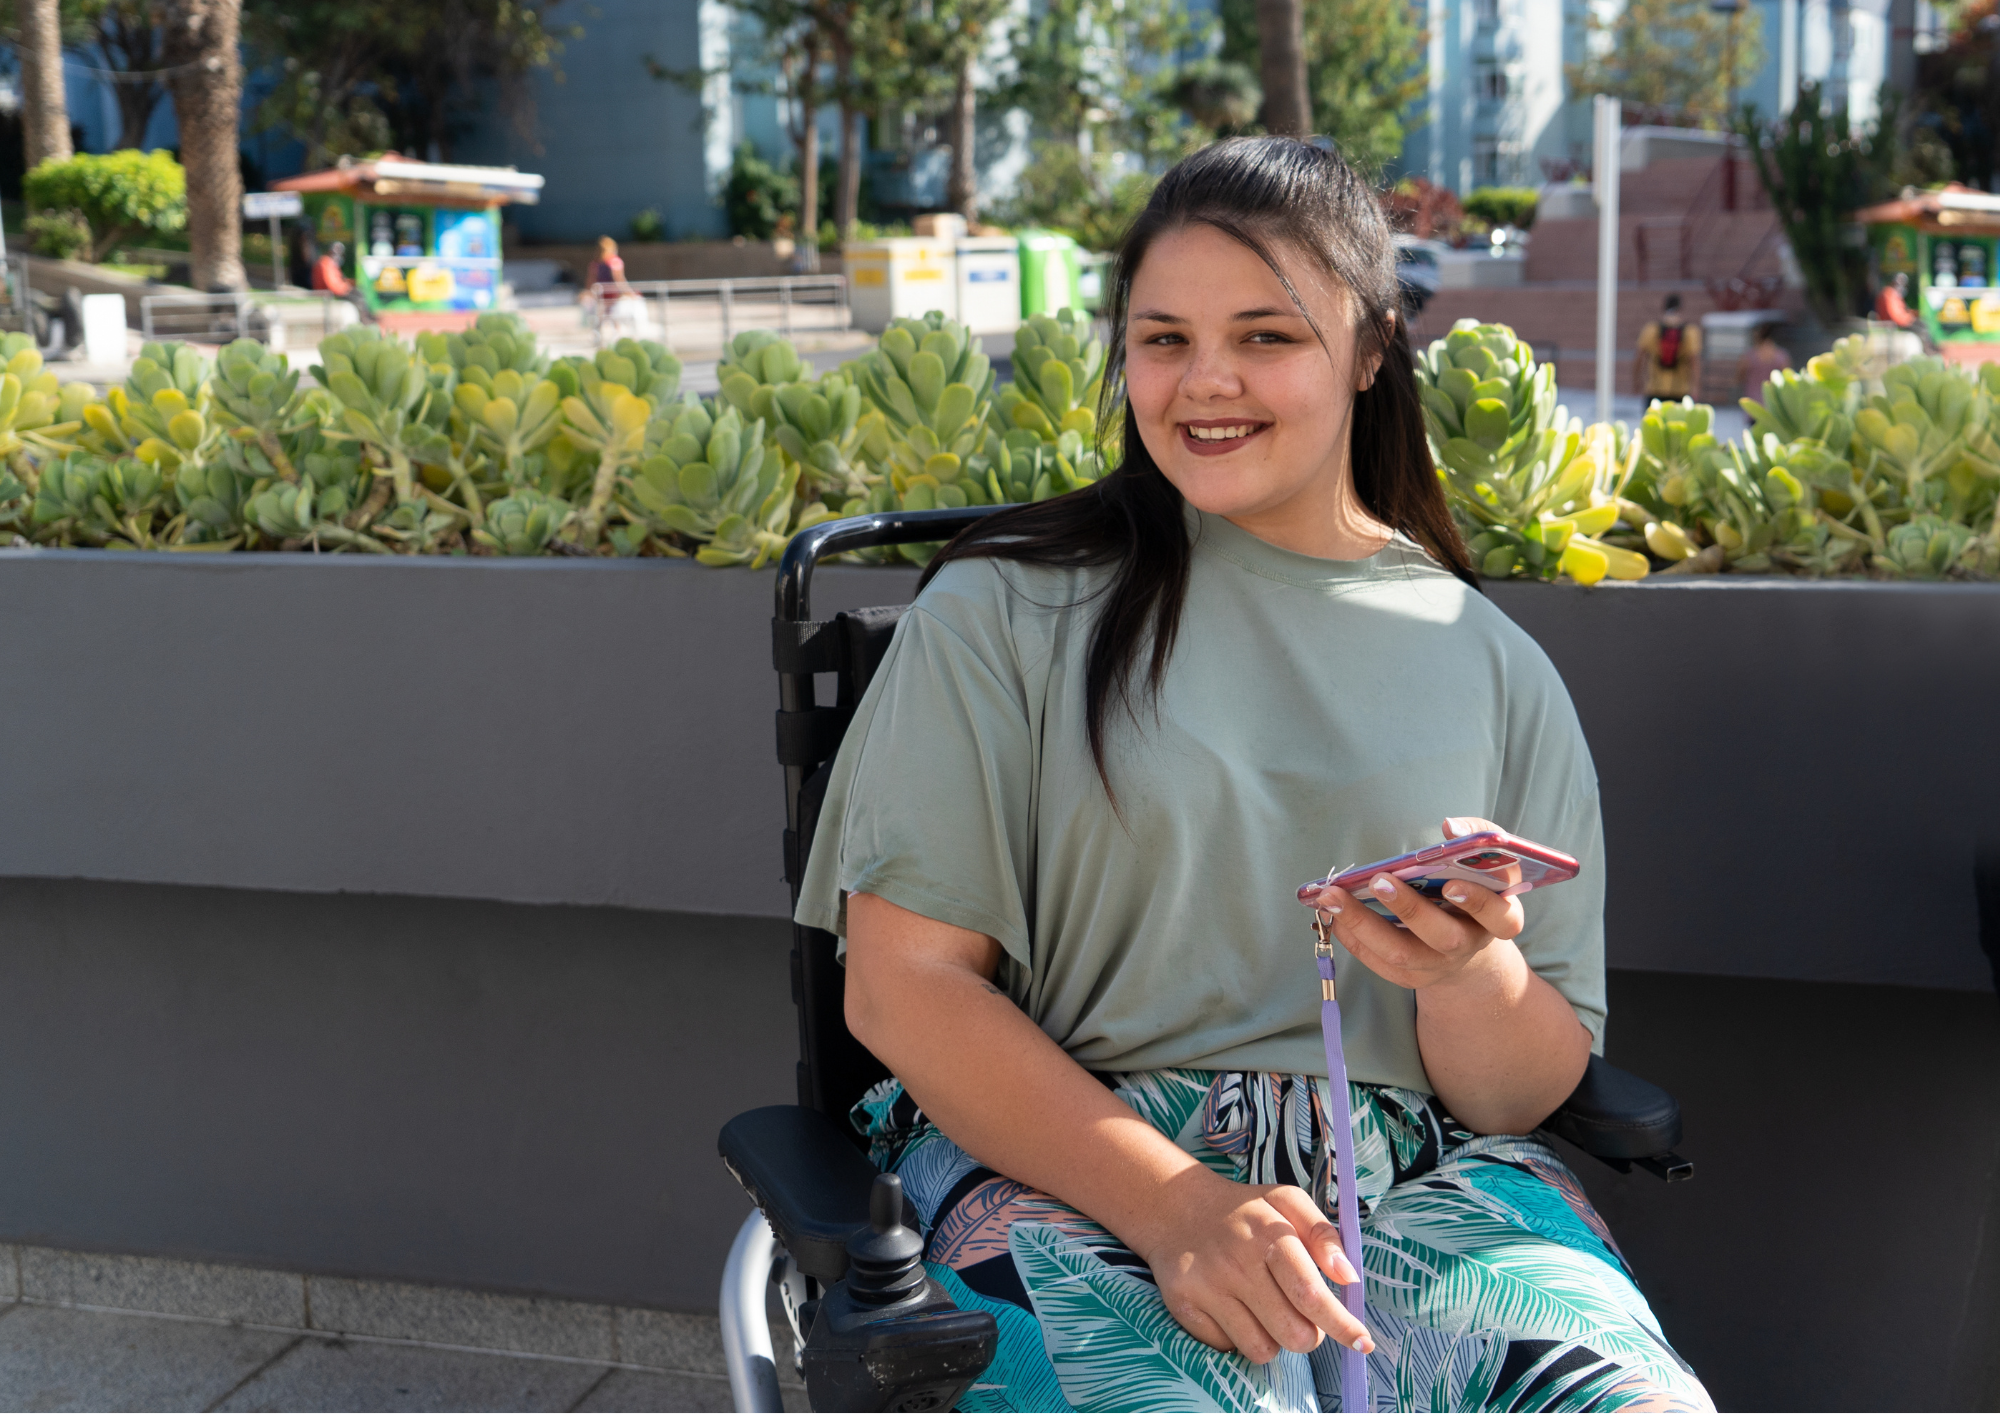 A young girl in a wheelchair smiles at the camera with a smartphone in hand.